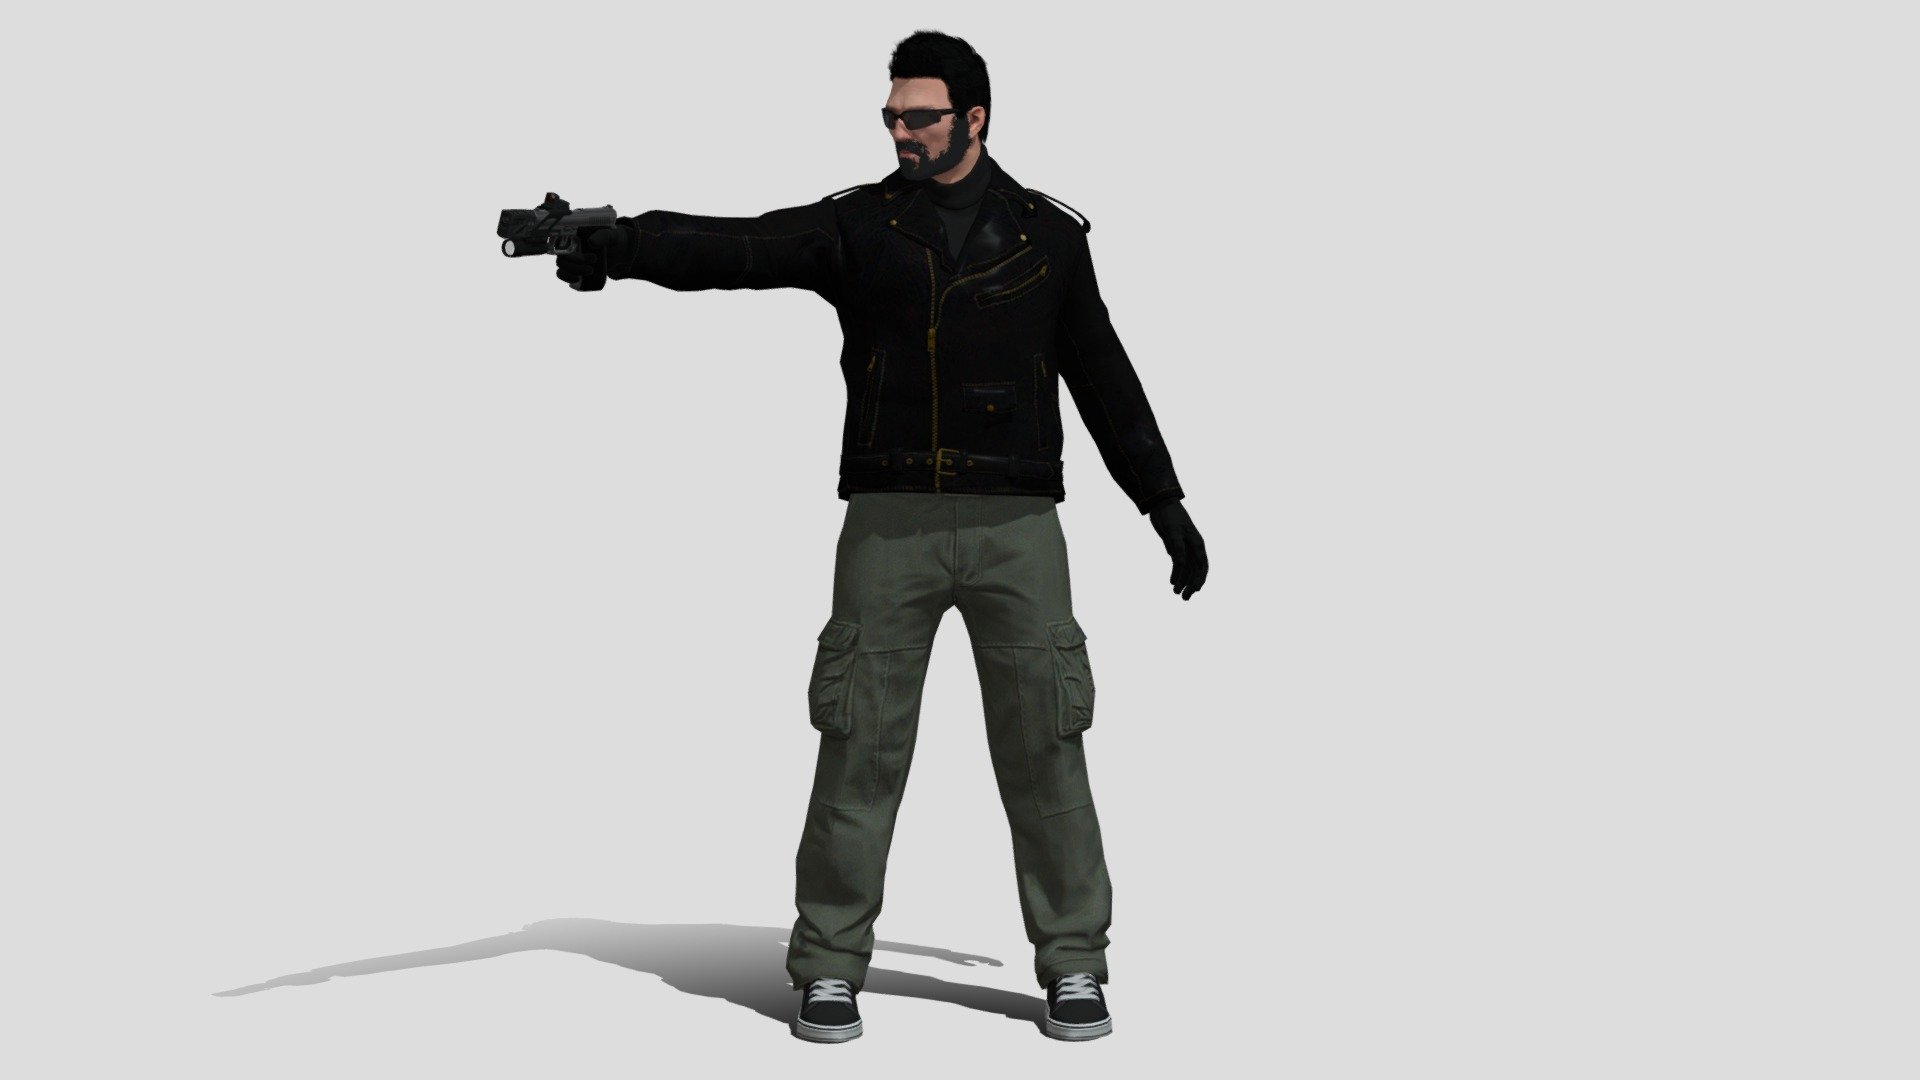 3D model of my GTA Online character featuring the iconic outfit worn by Claude in GTA III, remade using apparel from GTA Online 3d model